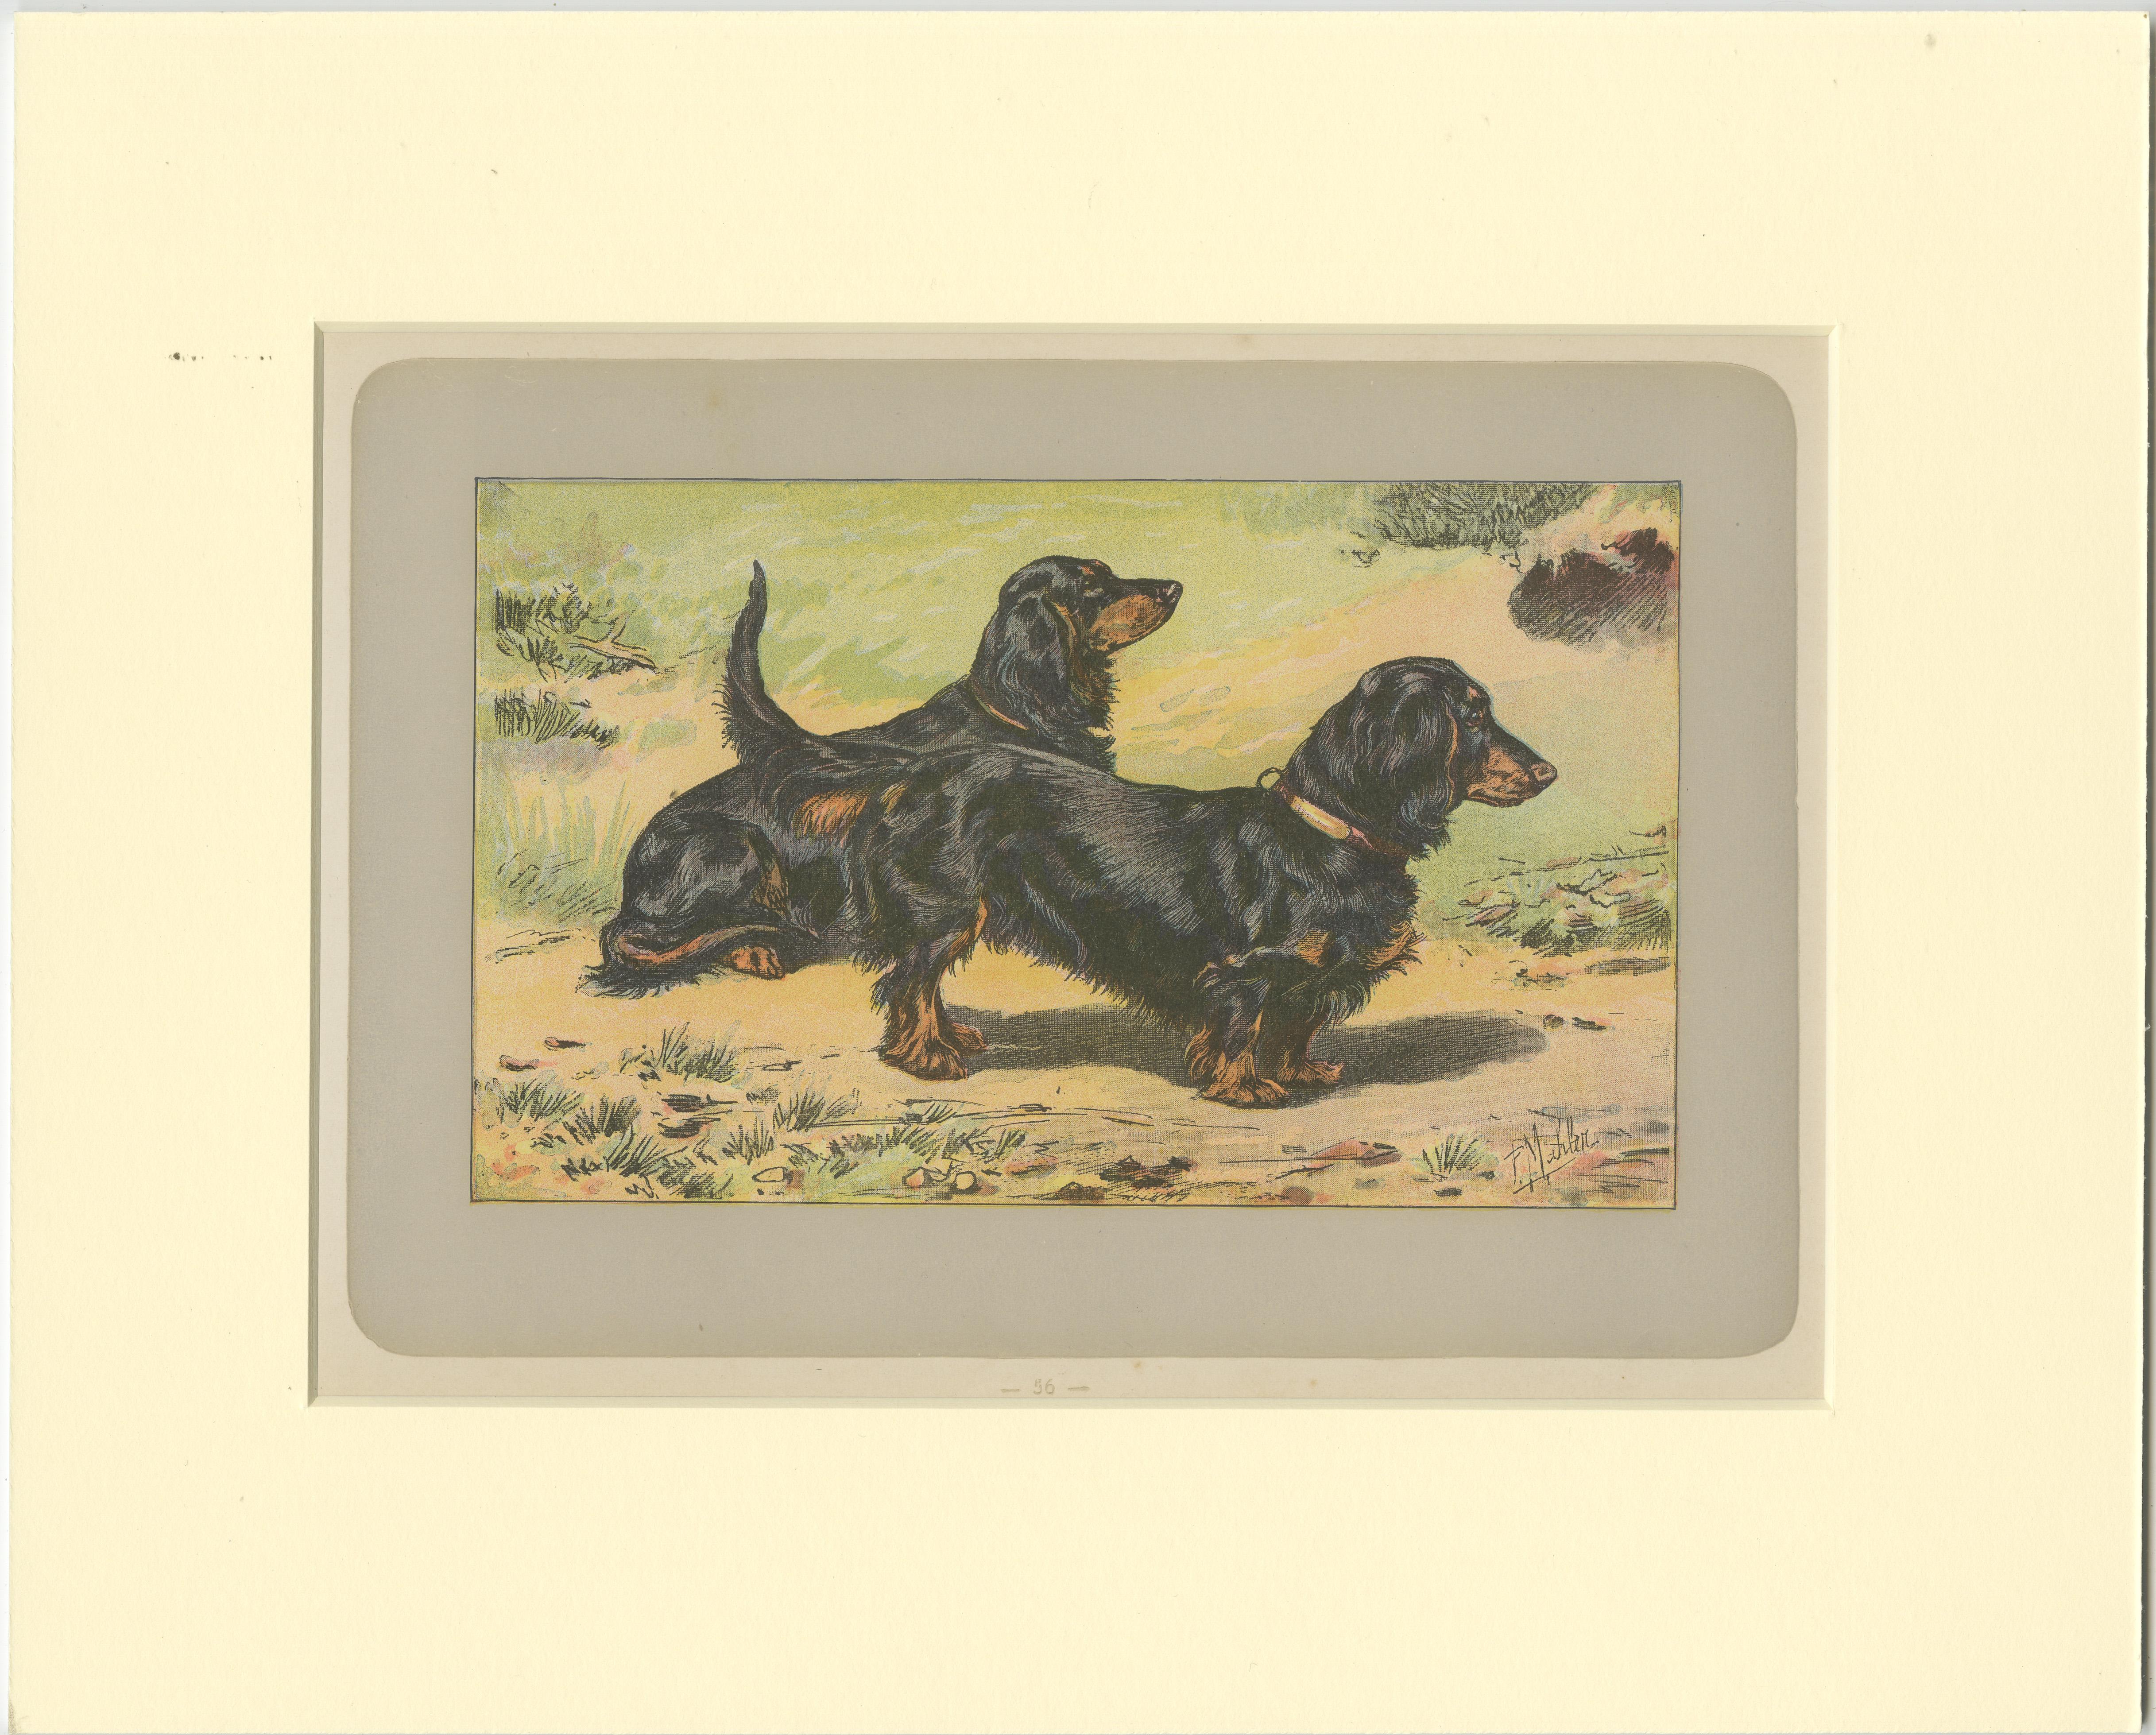 Antique dog print of the long-haired dachshund. This print originates from 'Les Chiens. Le Gibier et ses Ennemis' by P. Mahler. Saint-Étienne, Mimard & Blachon, 1907. 

Passepartout / matting included.